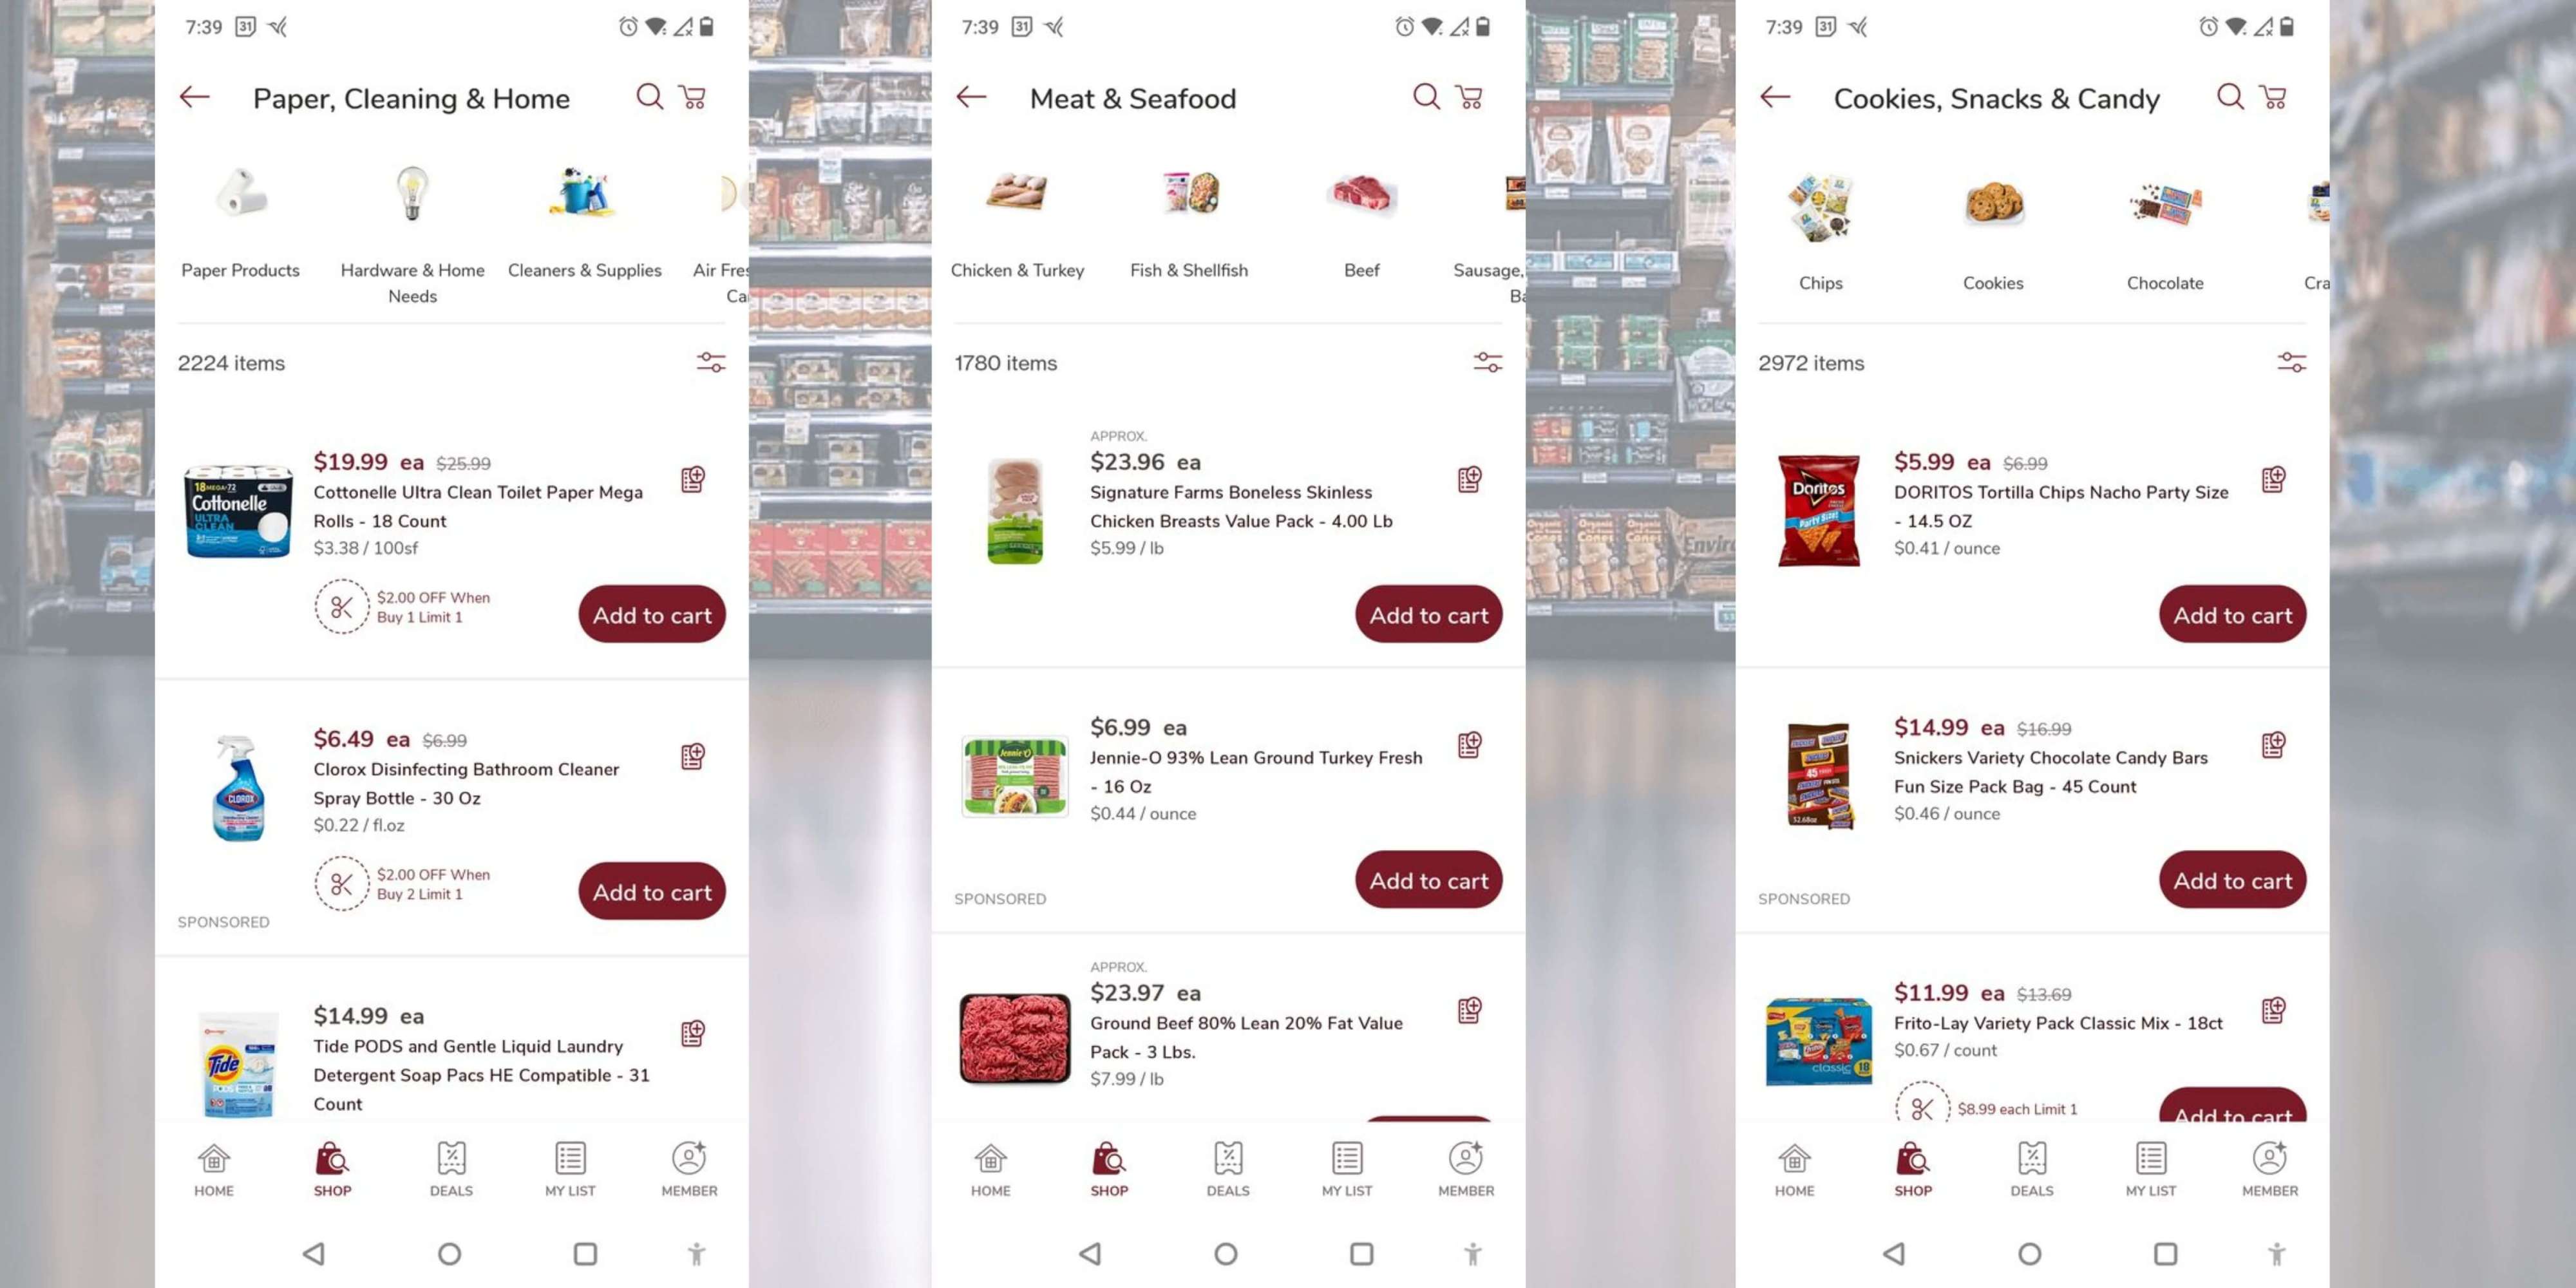 3 Screenshots of the Safeway app showing upsells in any category search.